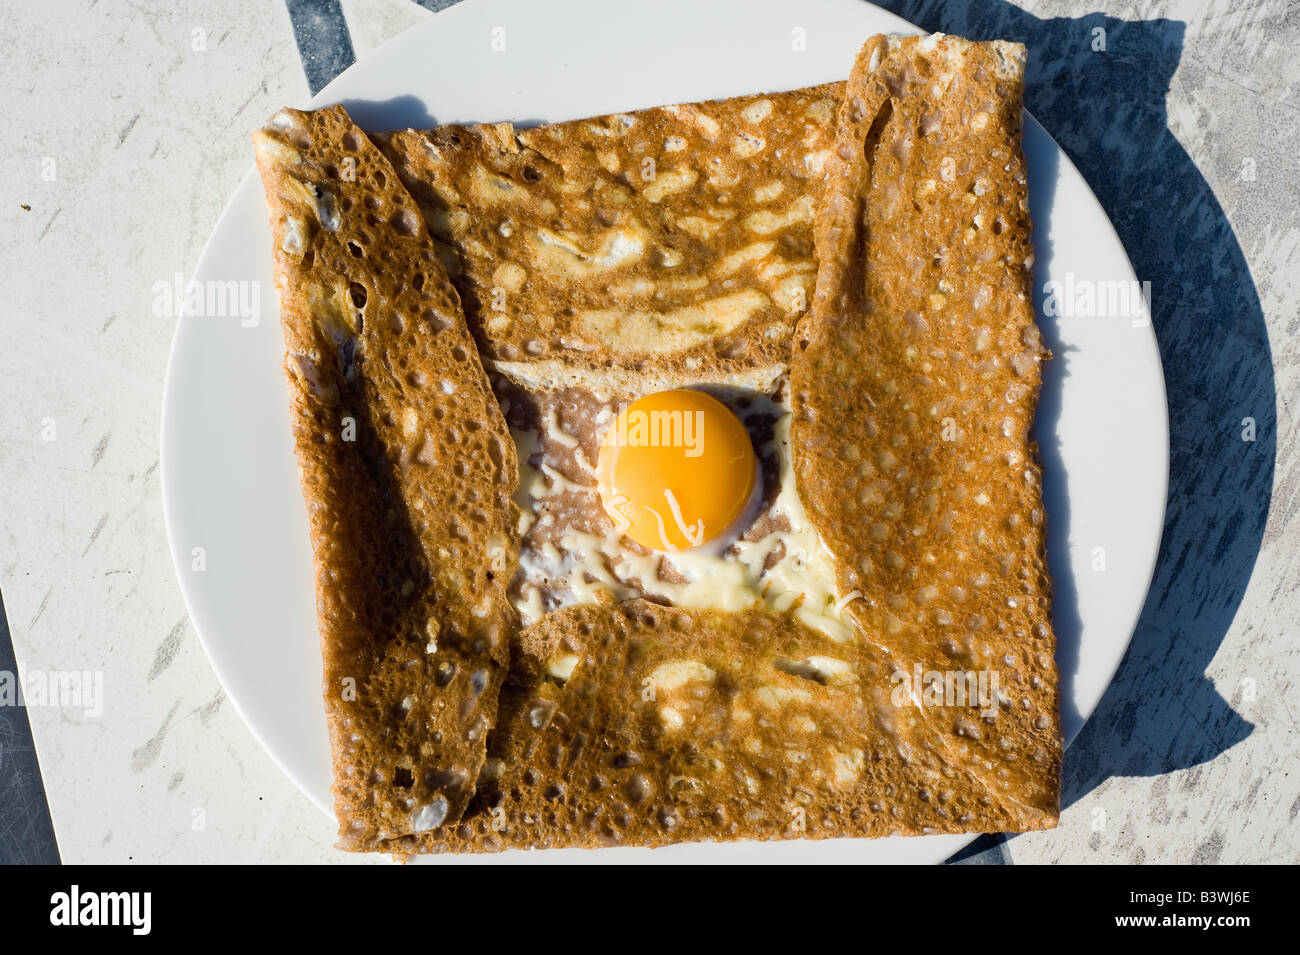 Galette de sarrasin complète, buckwheat crepe with ham, cheese and fried egg, french Brittany cuisine, France, Europe Stock Photo